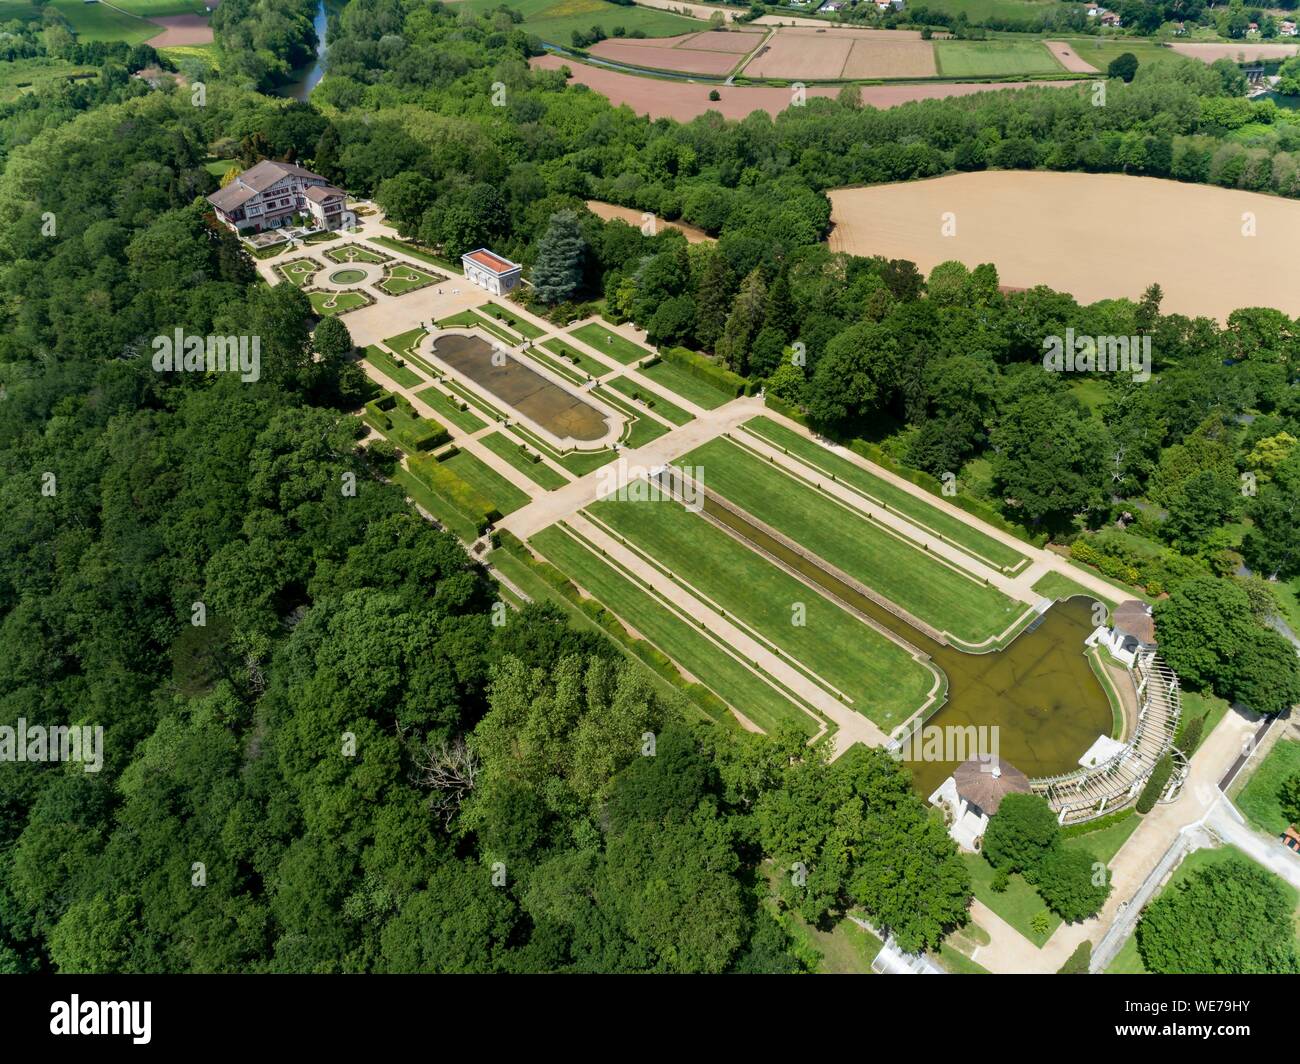 France, Pyrenees Atlantiques, Basque country, Cambo les Bains, the Villa Arnaga and its French garden, museum and Edmond Rostand house of neo Basque style (aerial view) Stock Photo